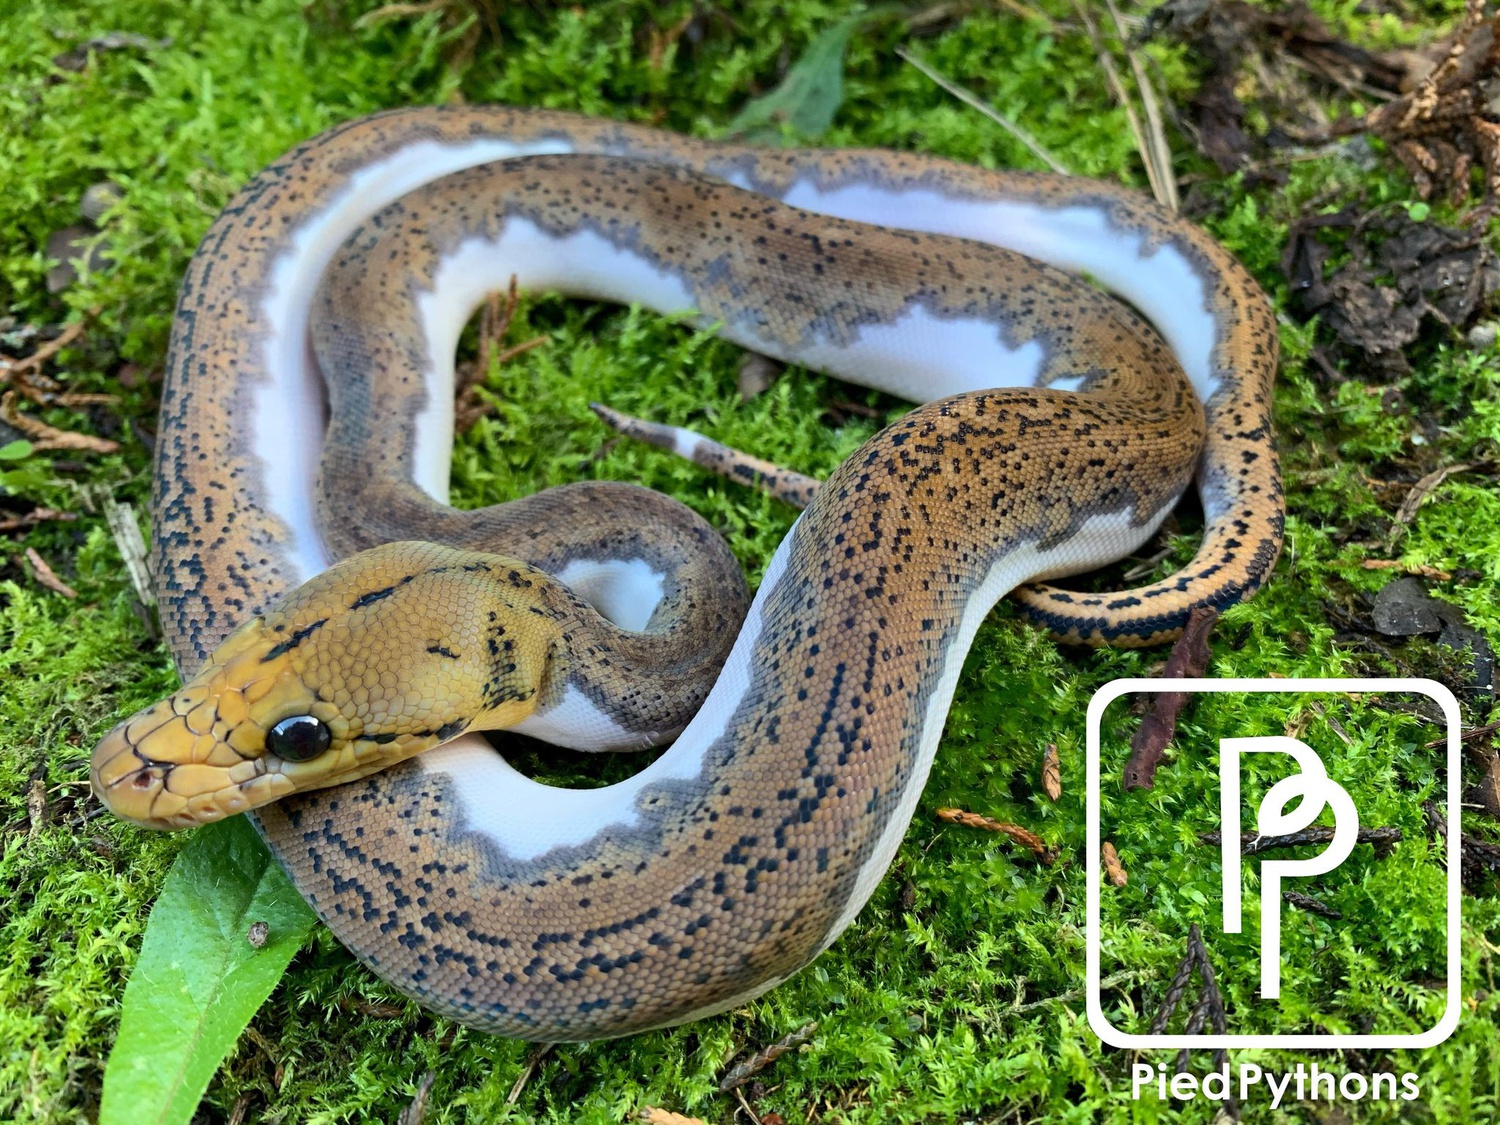 Pied Het Albino Reticulated Python by Pied Pythons